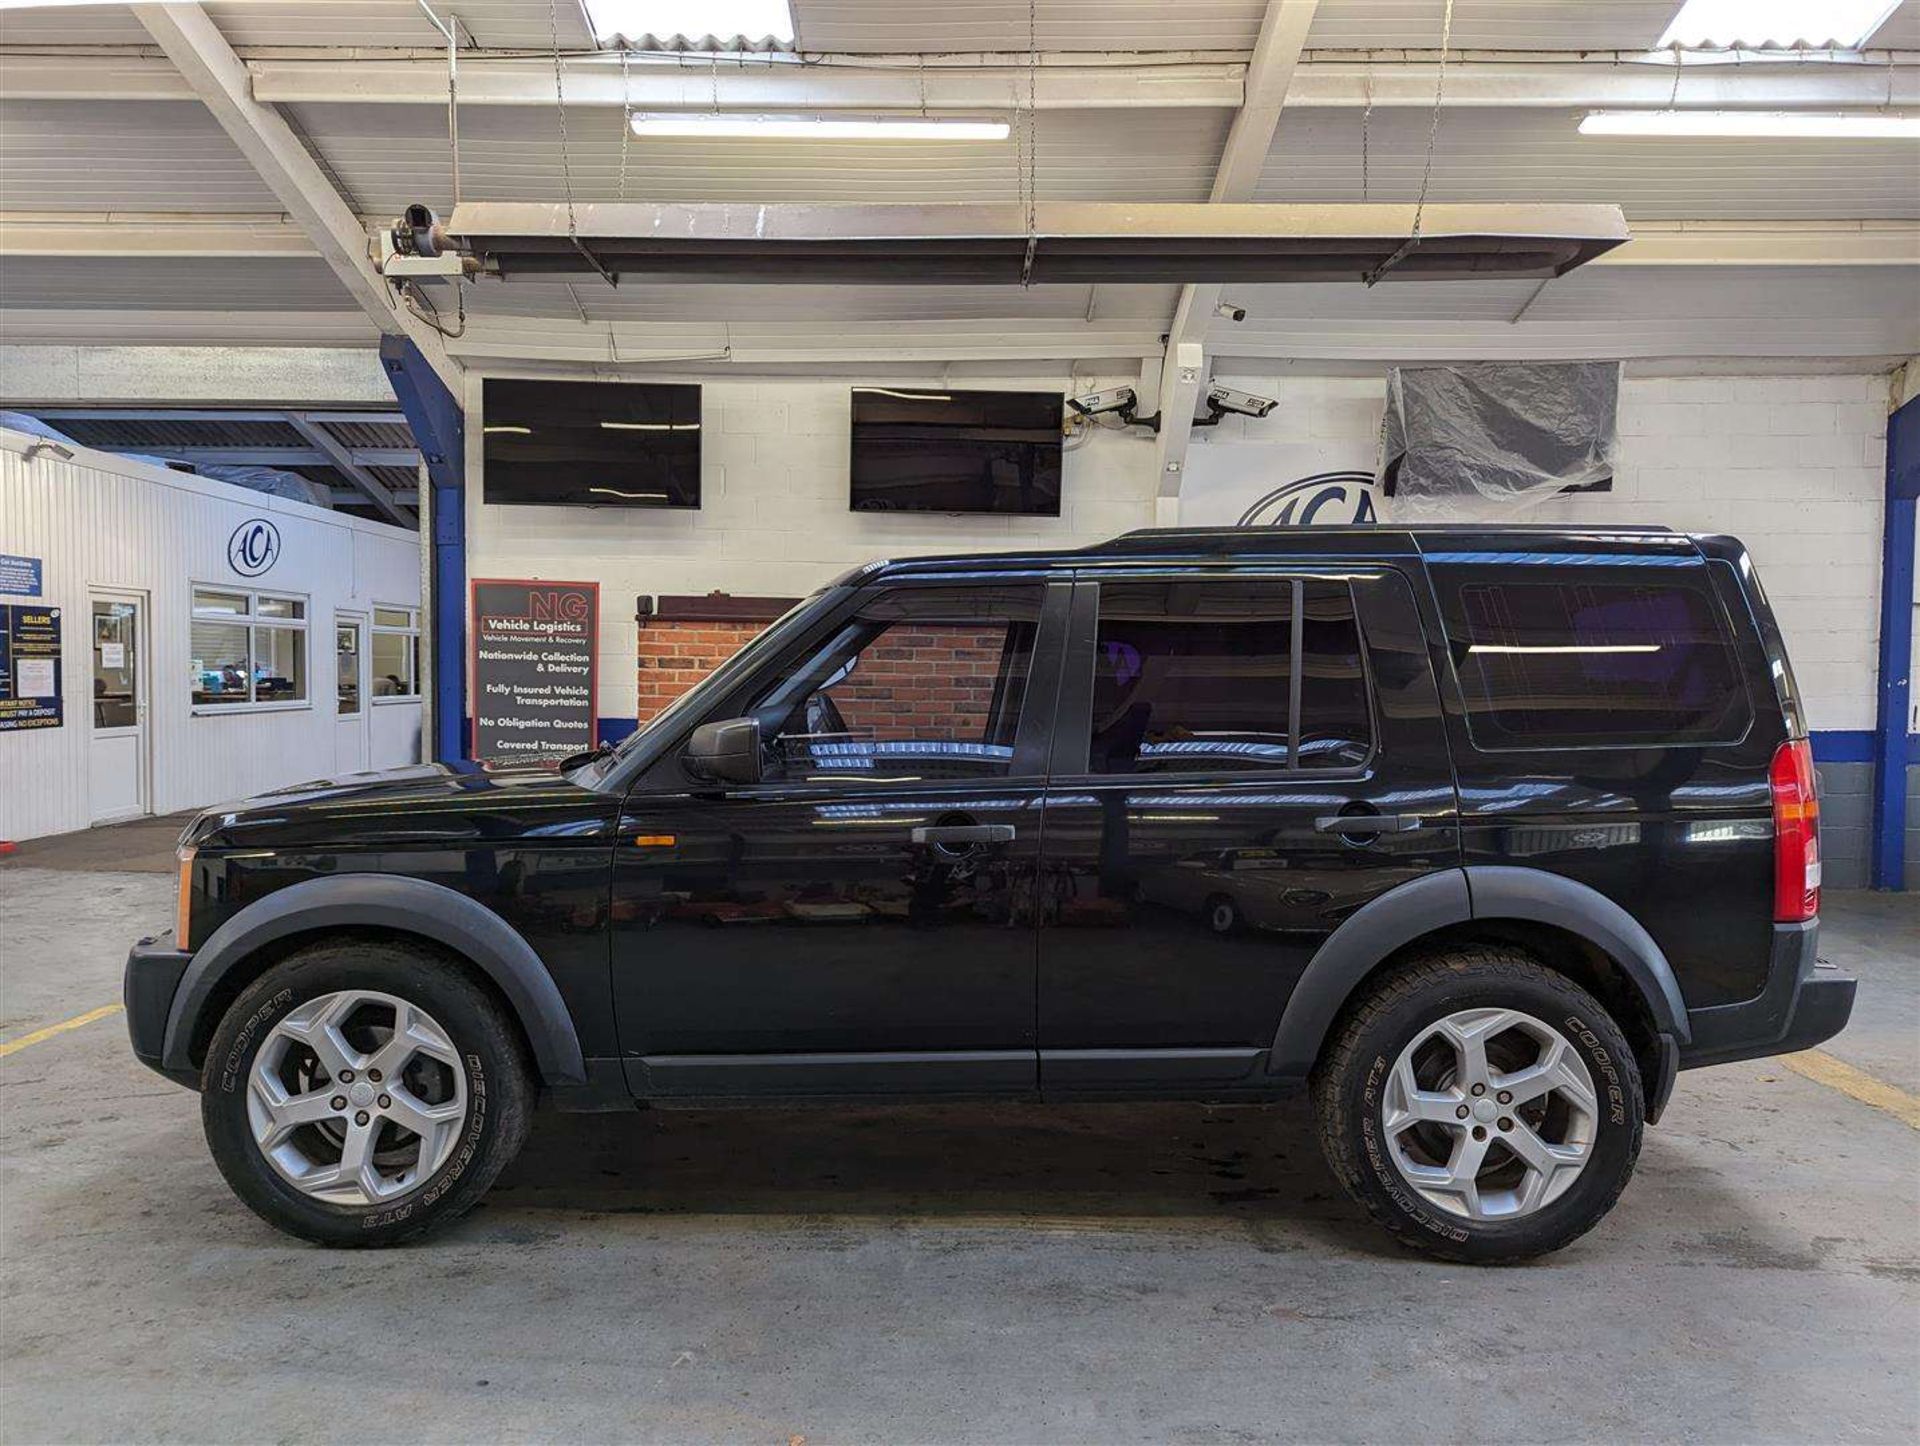 2006 LAND ROVER DISCOVERY 3 TDV6 S AUTO - Image 2 of 28